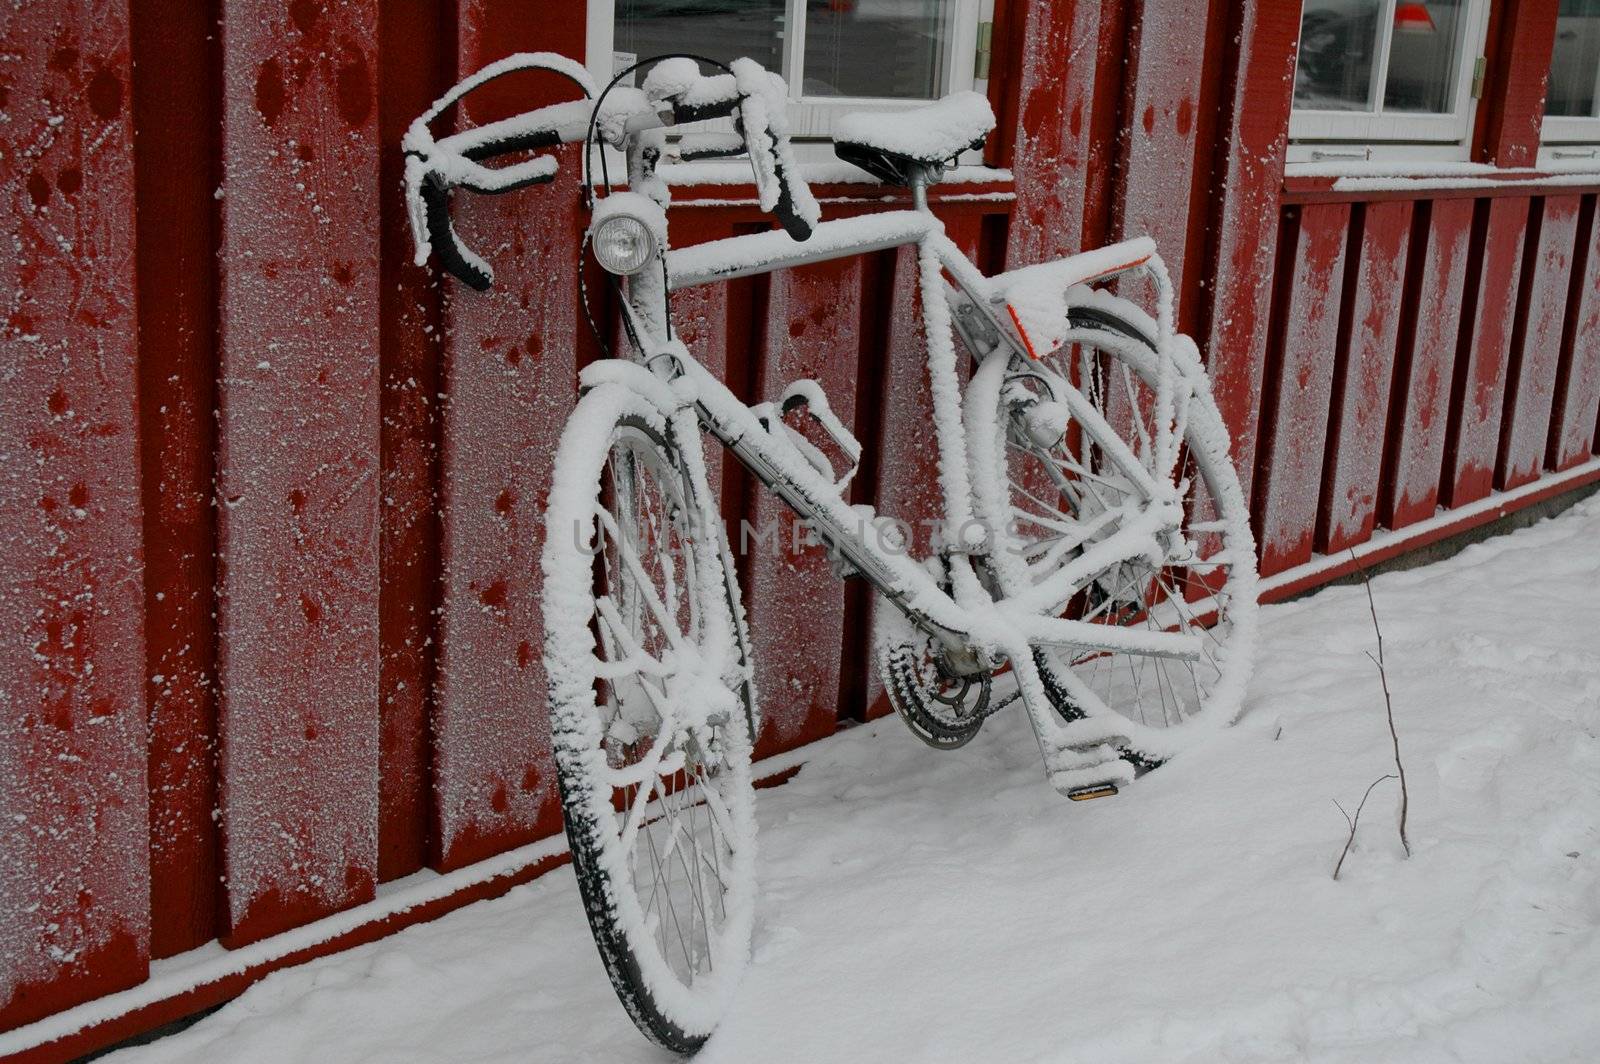 Bicycles in snow by Alenmax